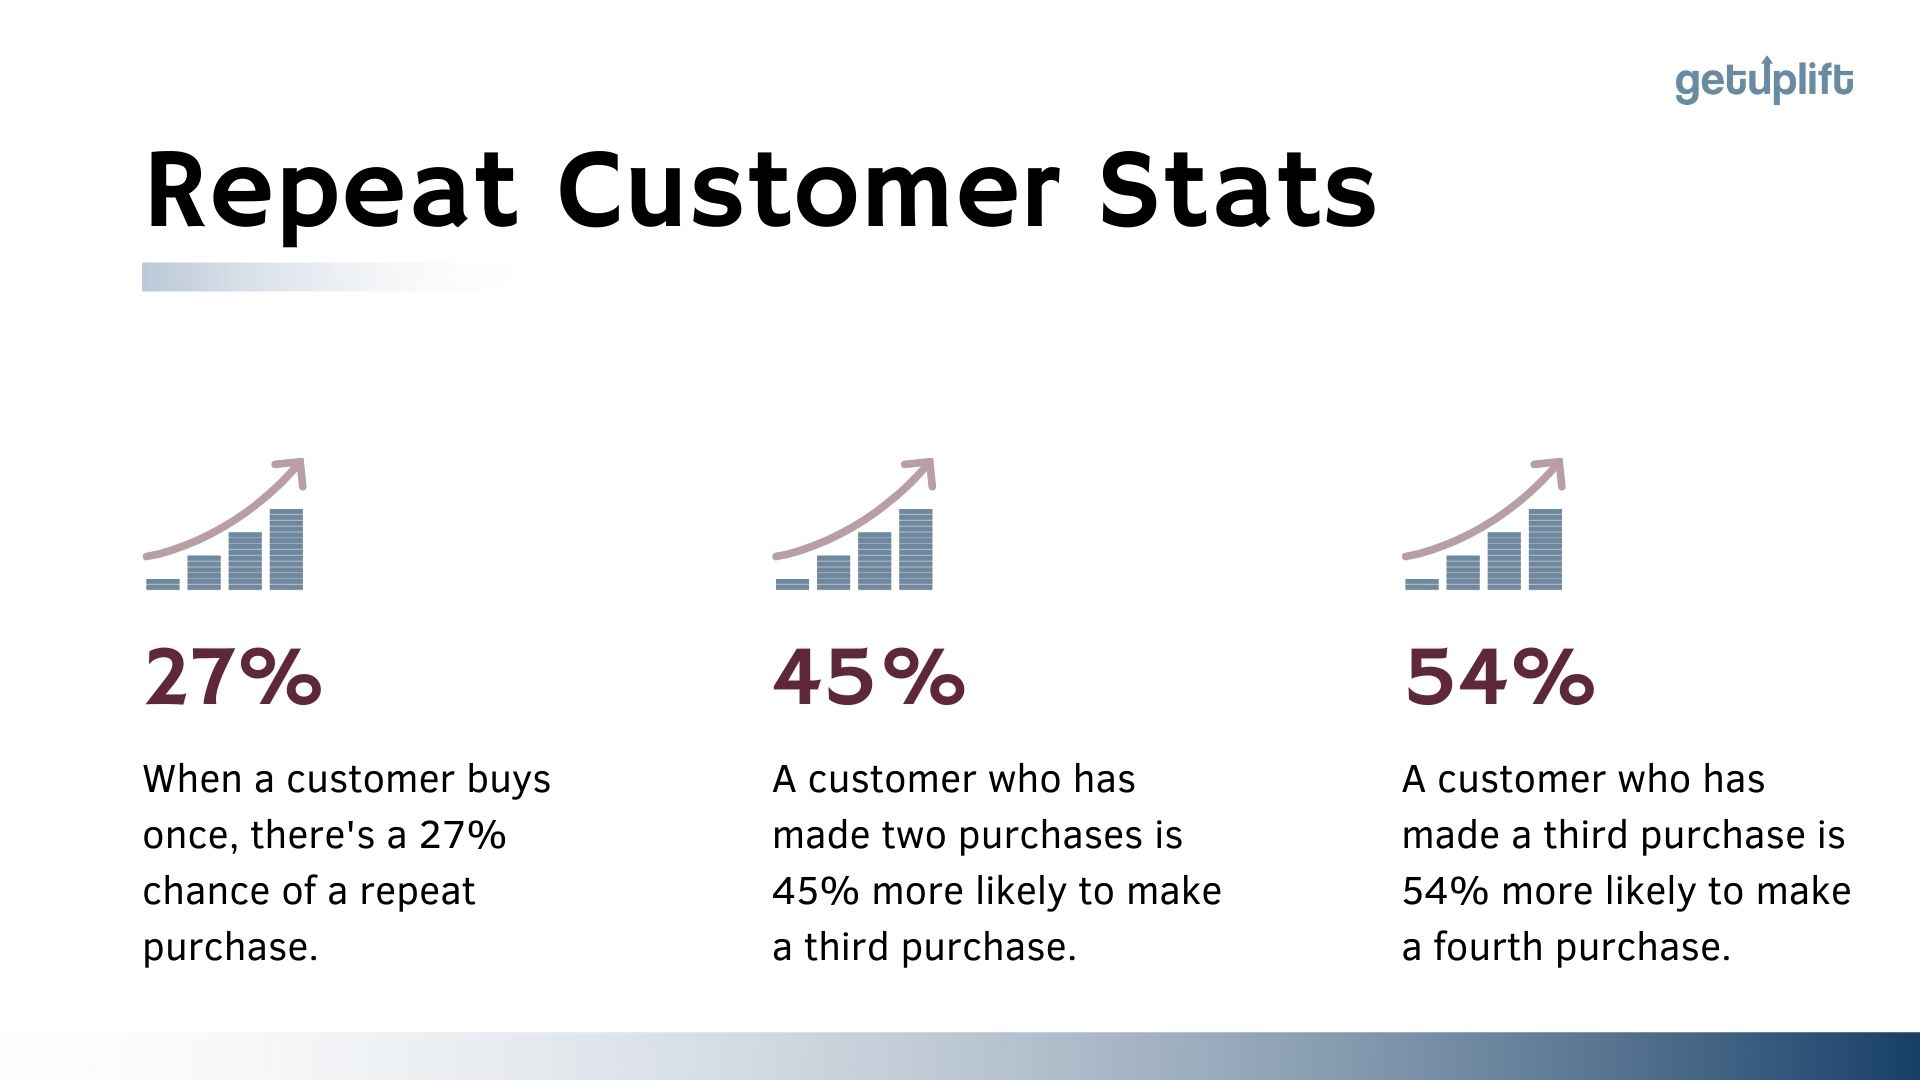 Customer retention statistics that show the likelihood of customers making repeat purchases